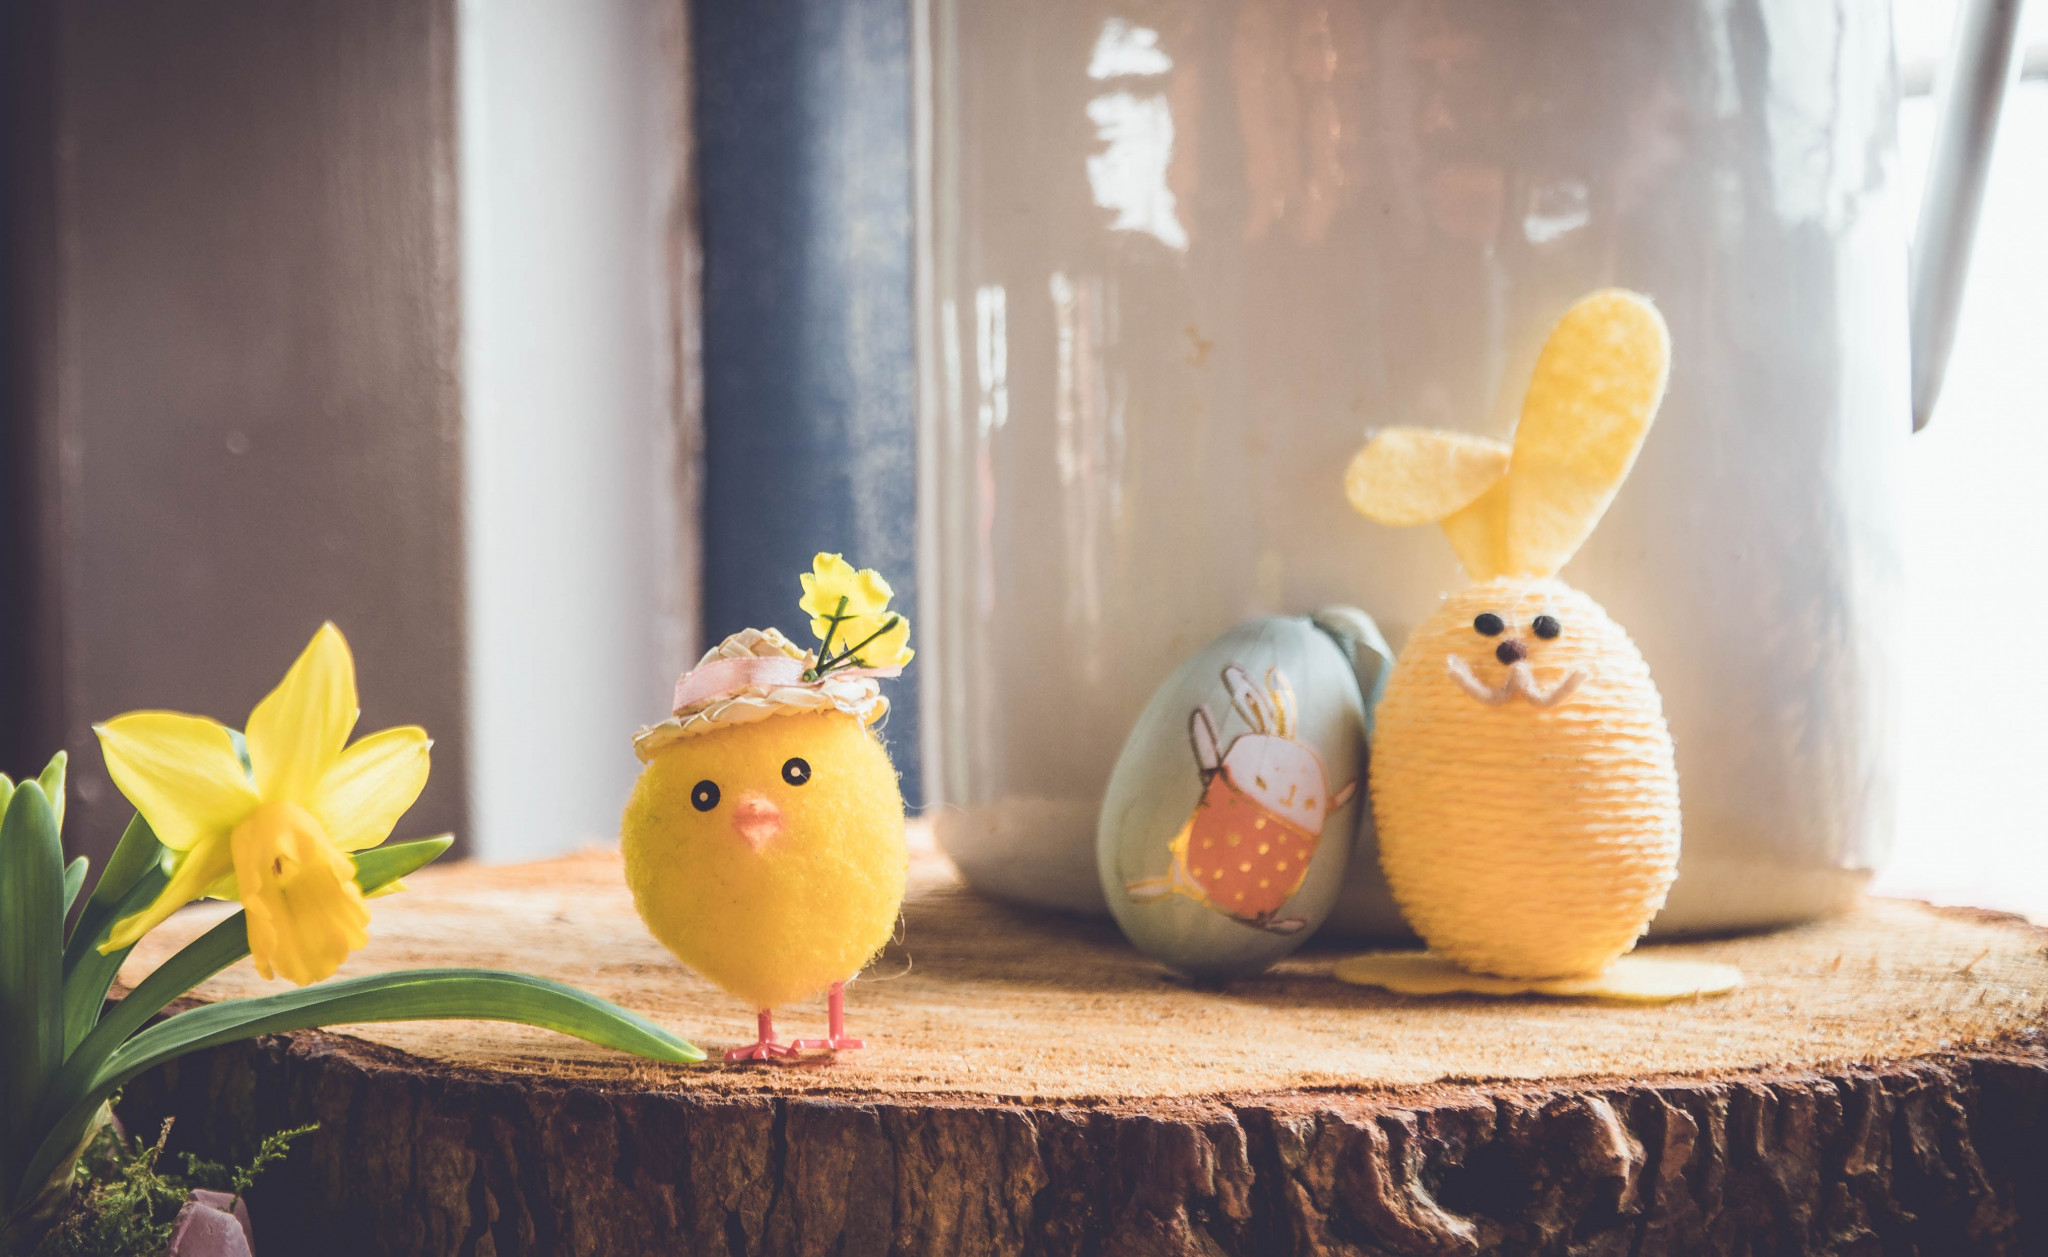 Chick model, painted egg and bunny made out of an egg